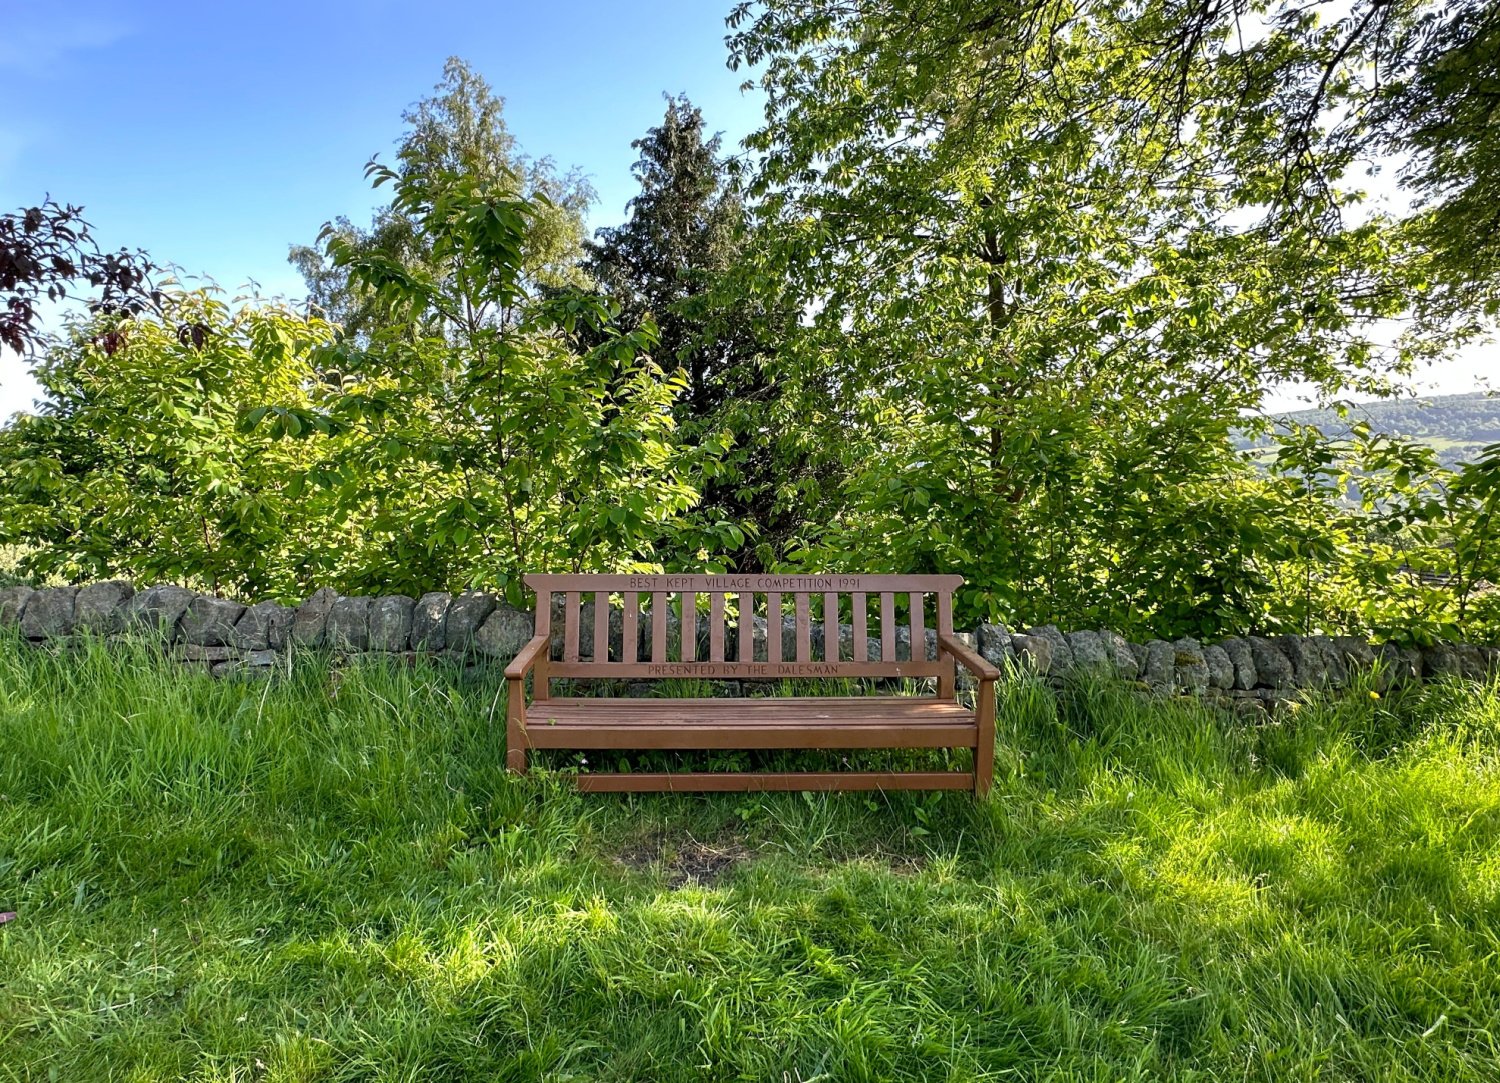 Image name micklethwaite best kept village bench west yorkshire the 7 image from the post Micklethwaite, West Yorkshire in Yorkshire.com.